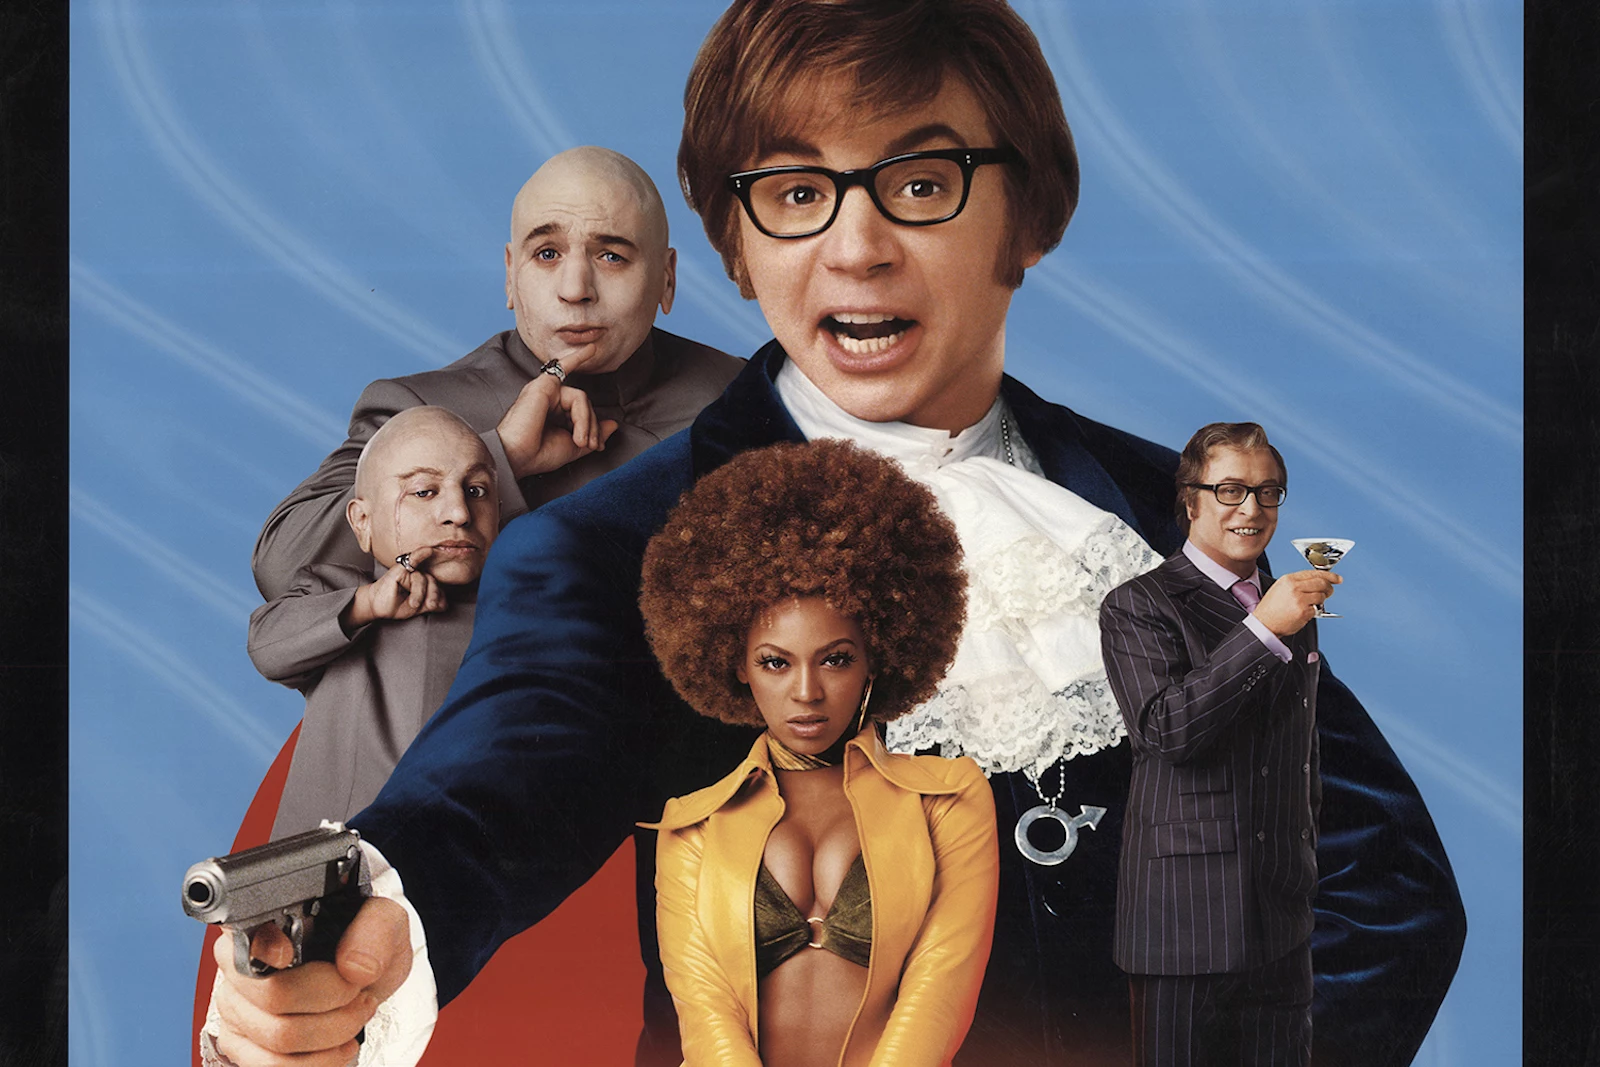 20 Years Ago: When 'Austin Powers in Goldmember' Was King